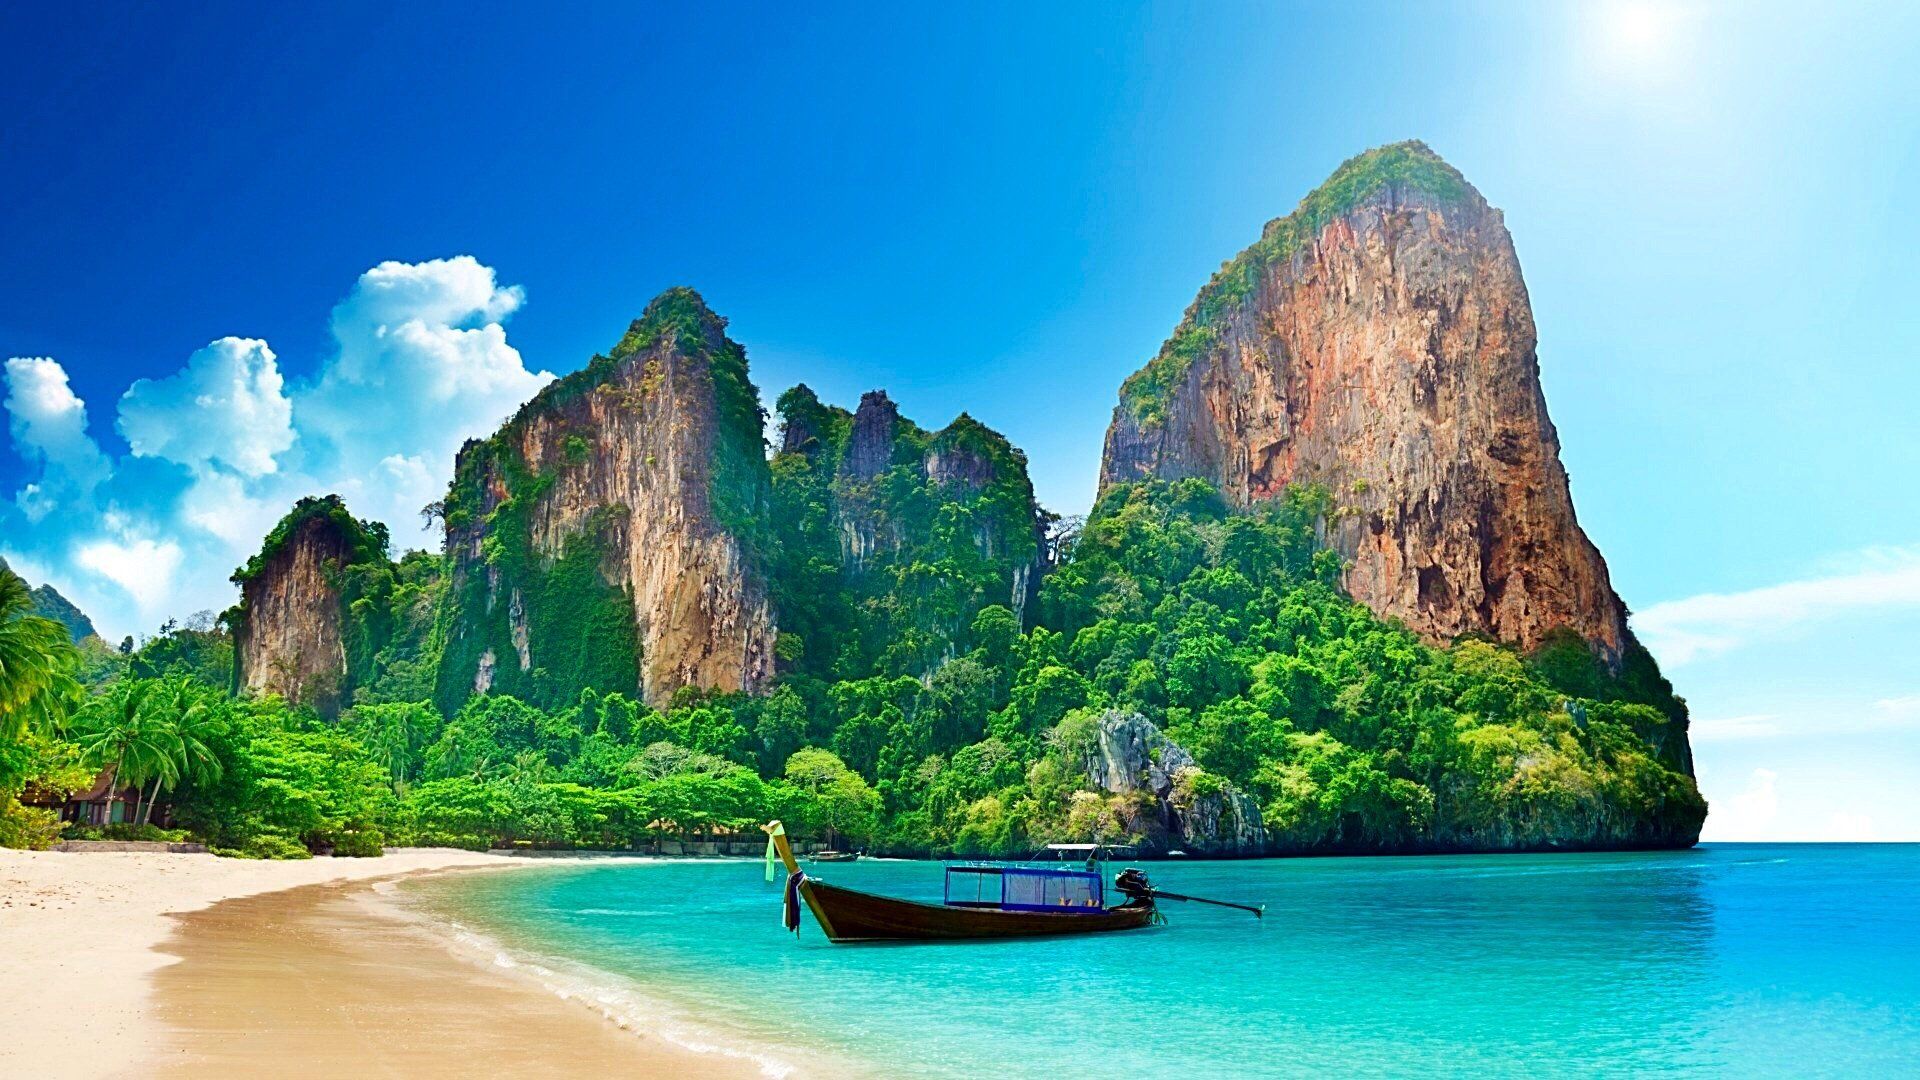 Krabi 4K wallpaper for your desktop or mobile screen free and easy to download